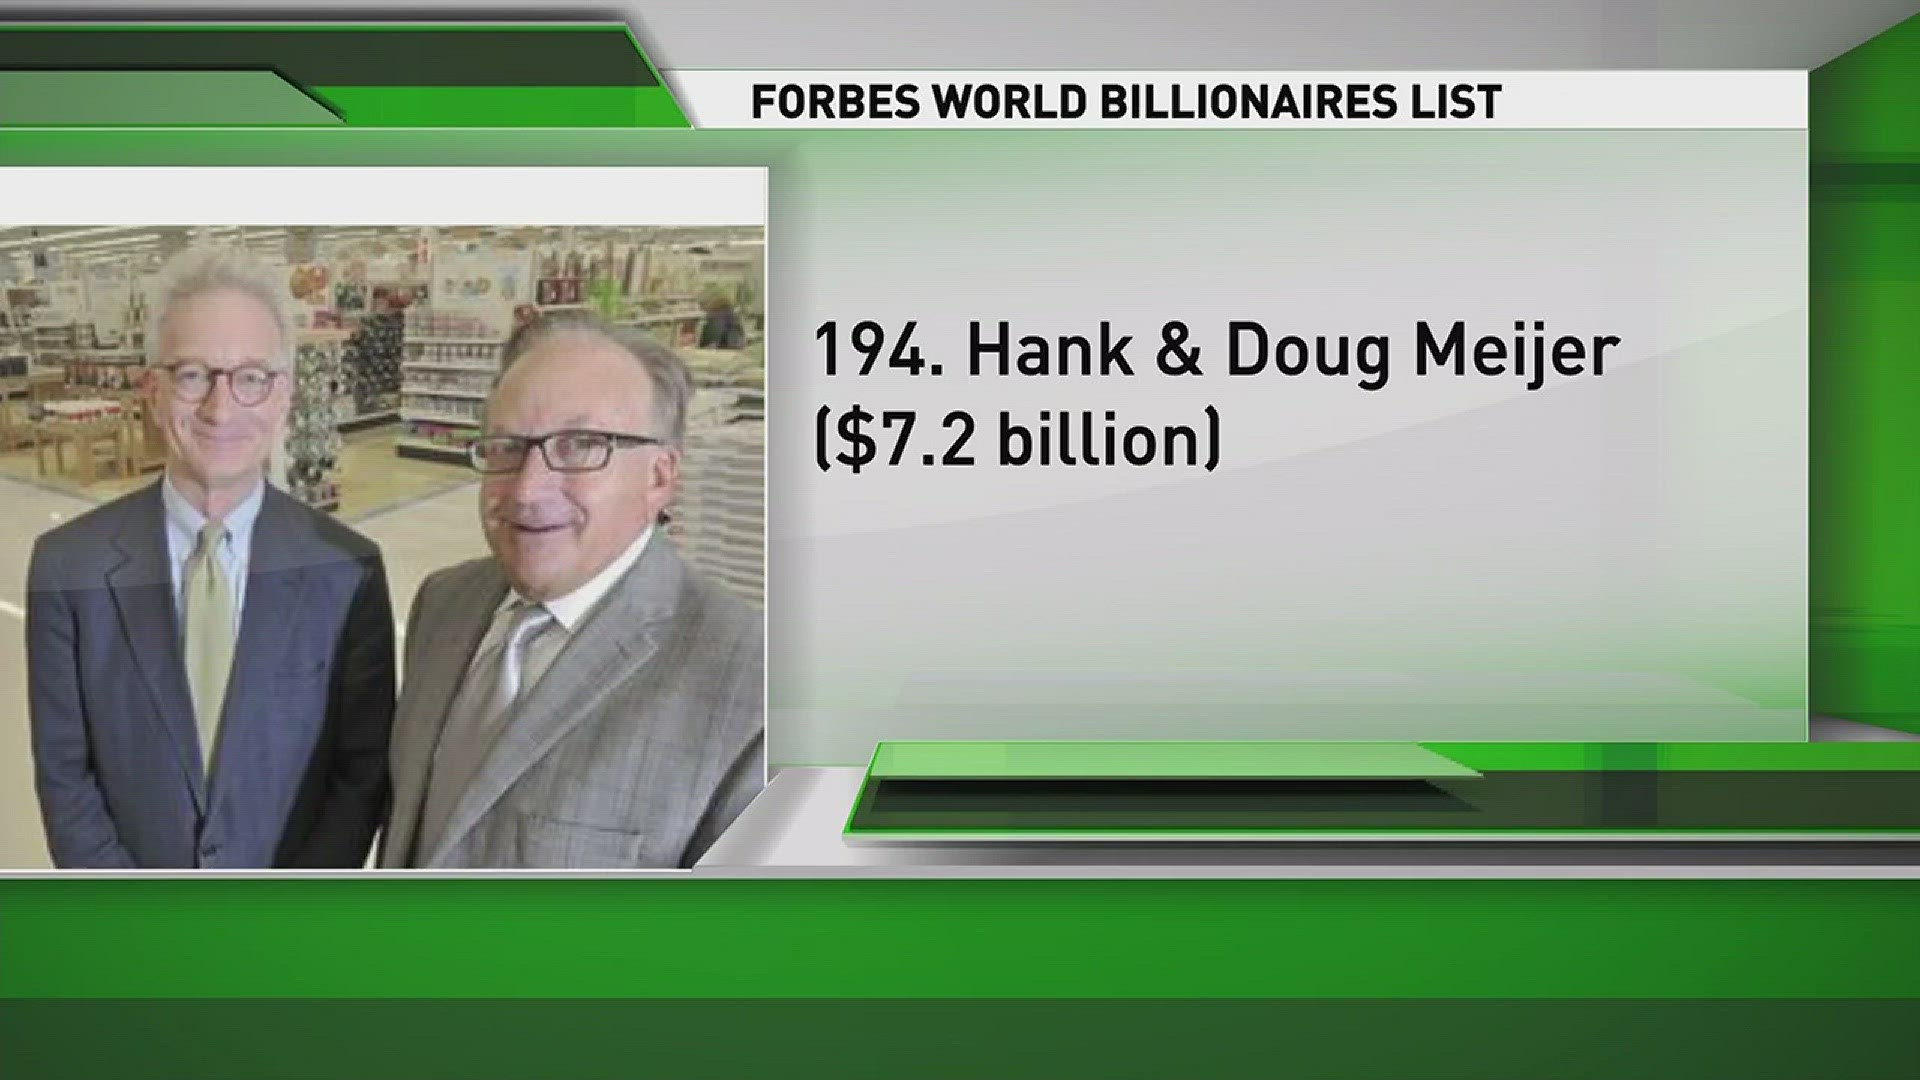 Rockefeller's death comes on the day when Forbes released its annual list of the world's billionaires.